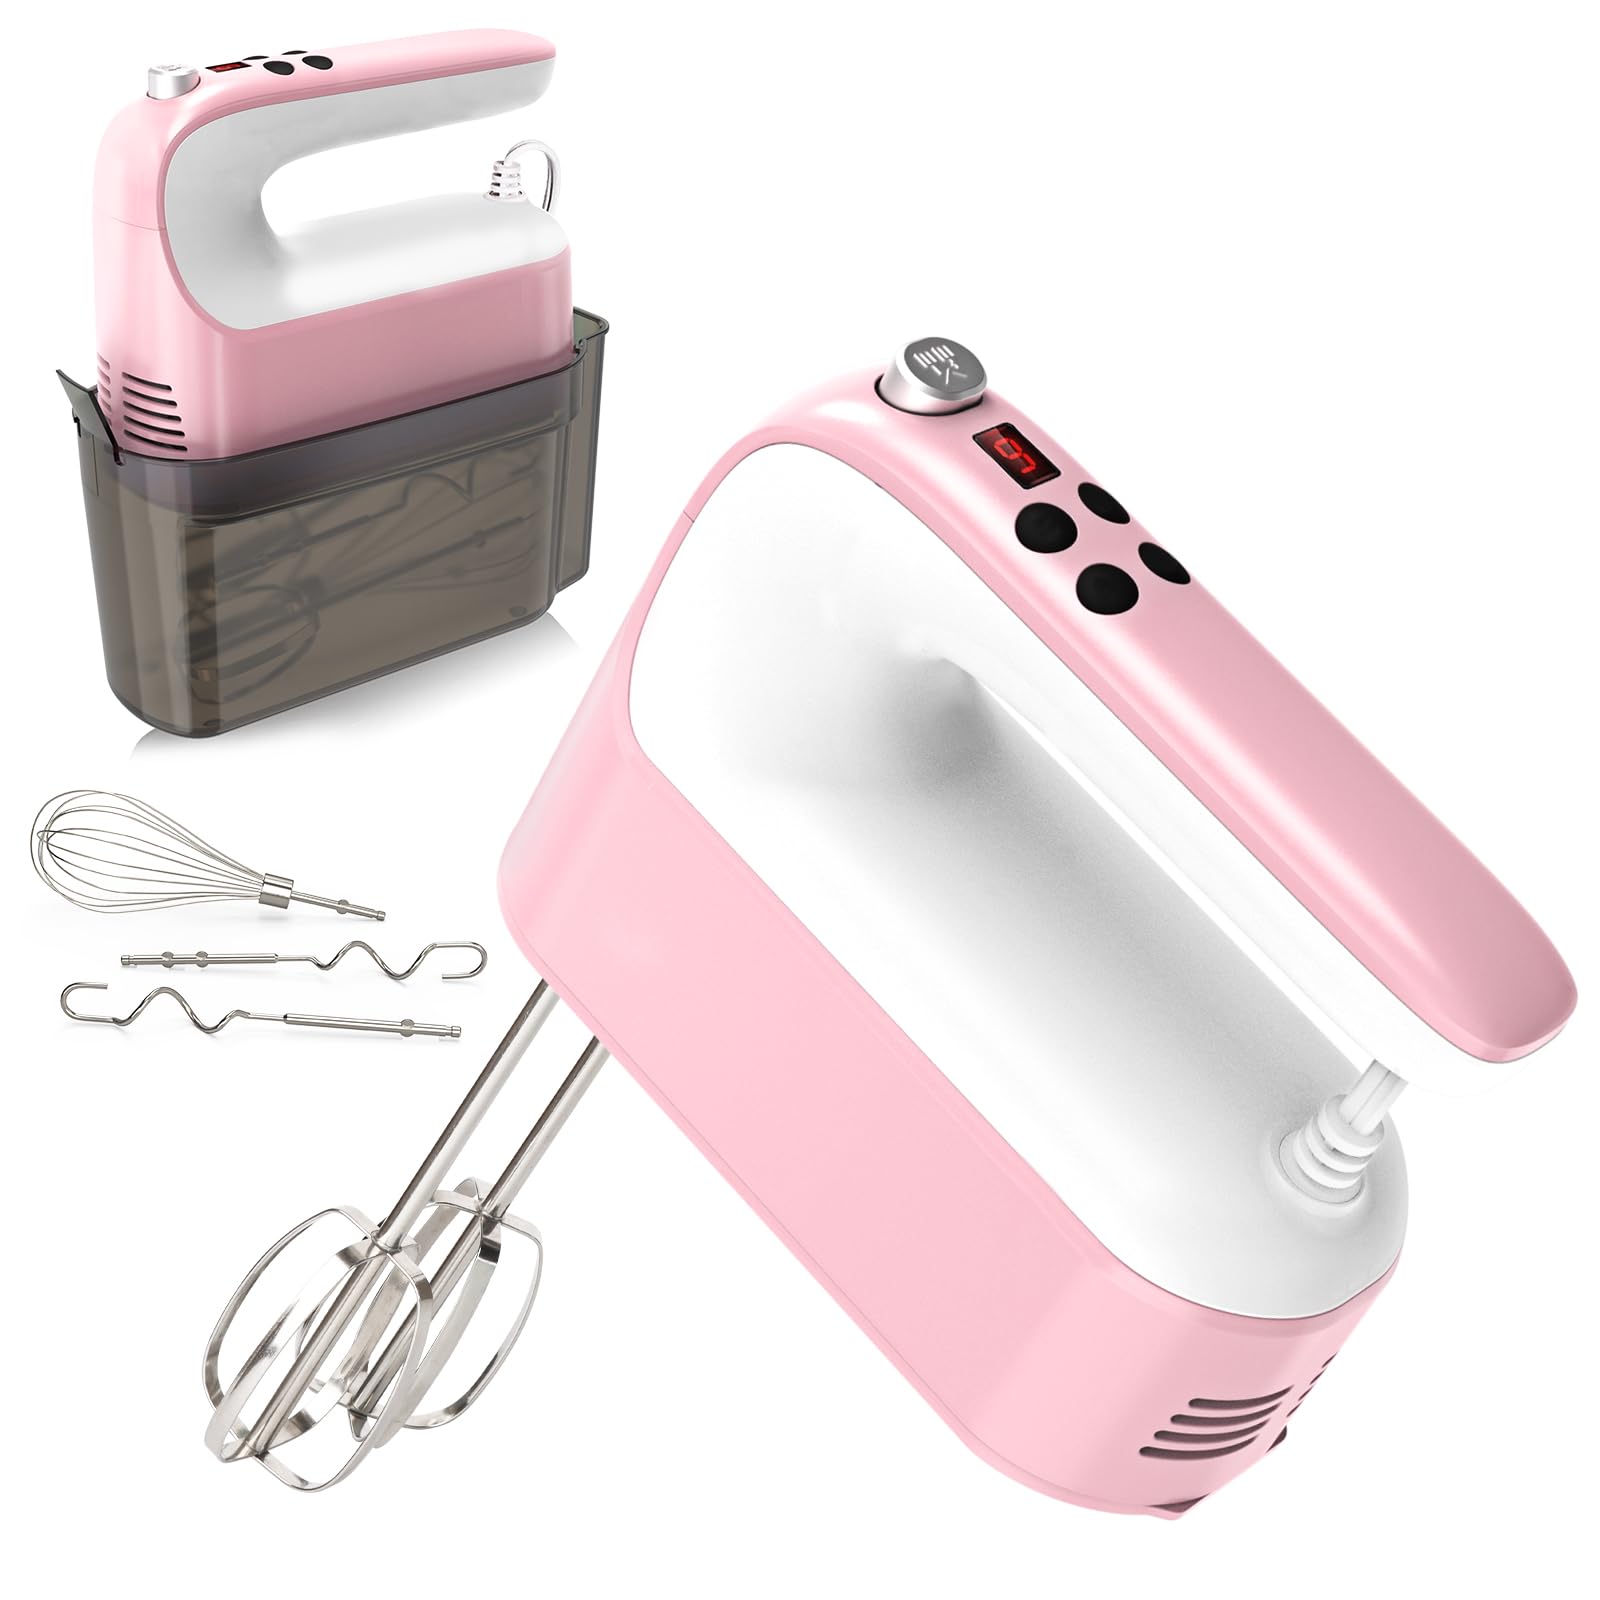 Yomelo 9-Speed Digital Hand Mixer Electric, 400W DC Motor, Hand Mixer electric Handheld with Snap-On Storage Case, Touch Button, Turbo Boost, 5x Stainless Steel Accessories (Pink)